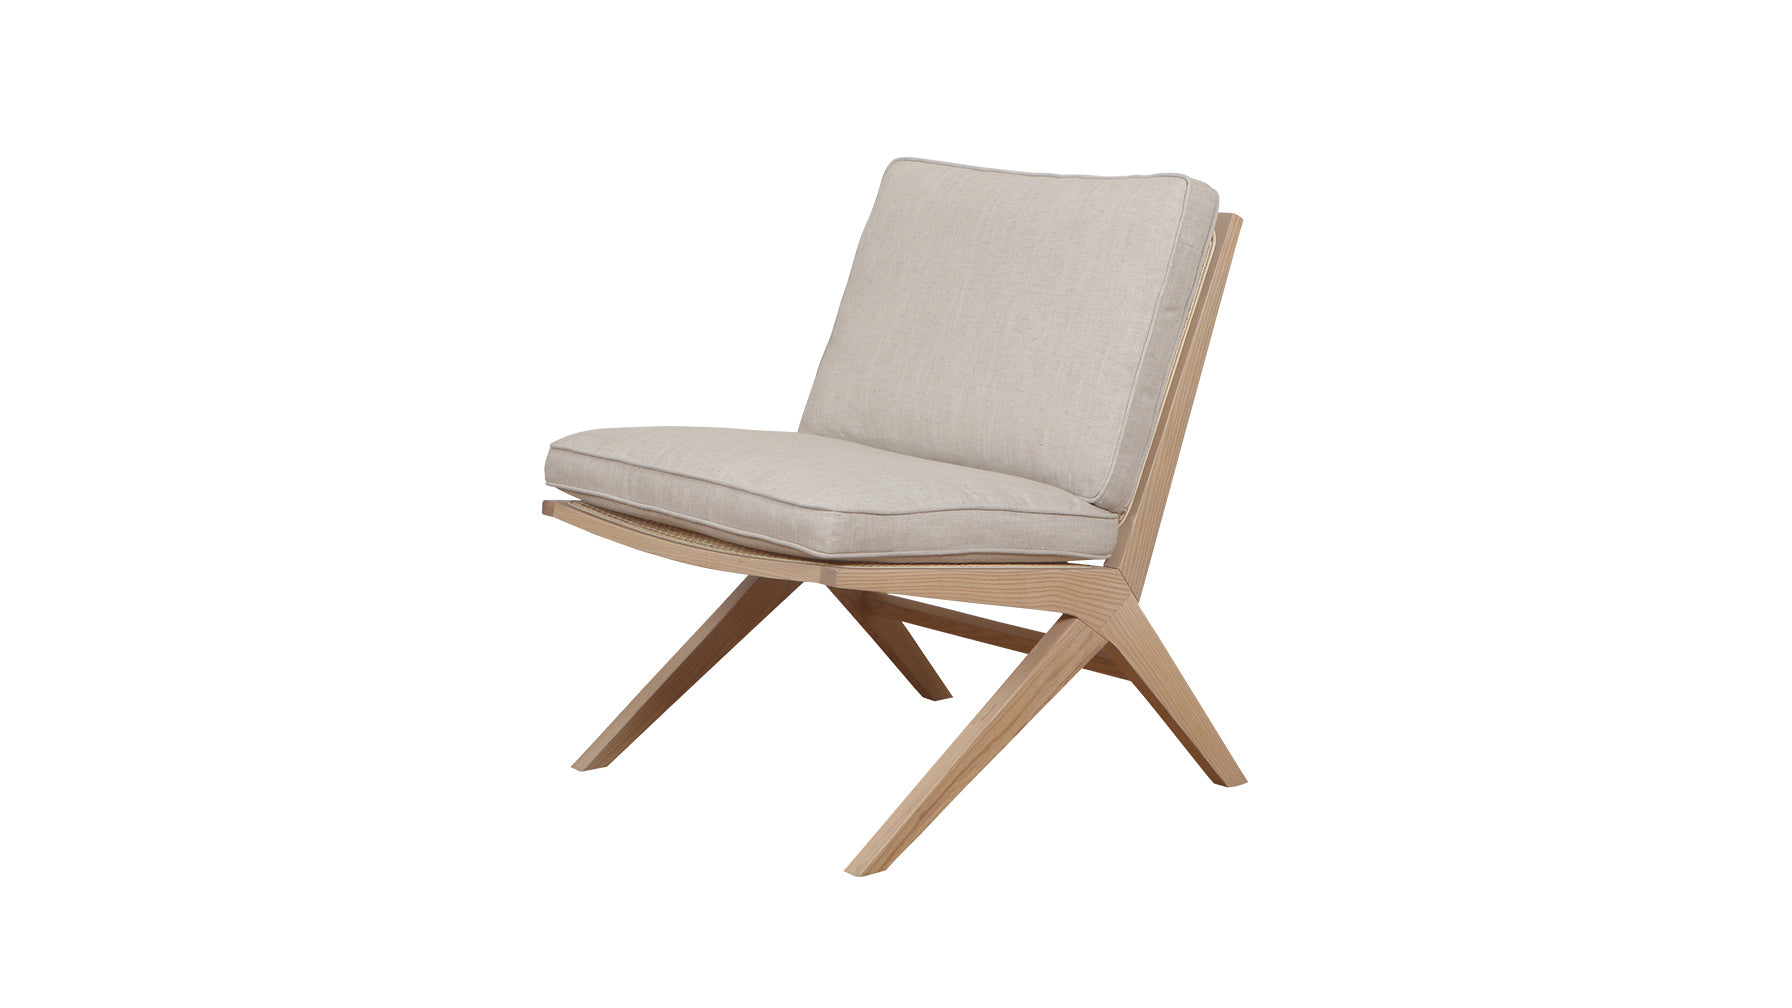 Endless Summer Lounge Chair with Cushion, White Ash/Natural Fabric - Image 8